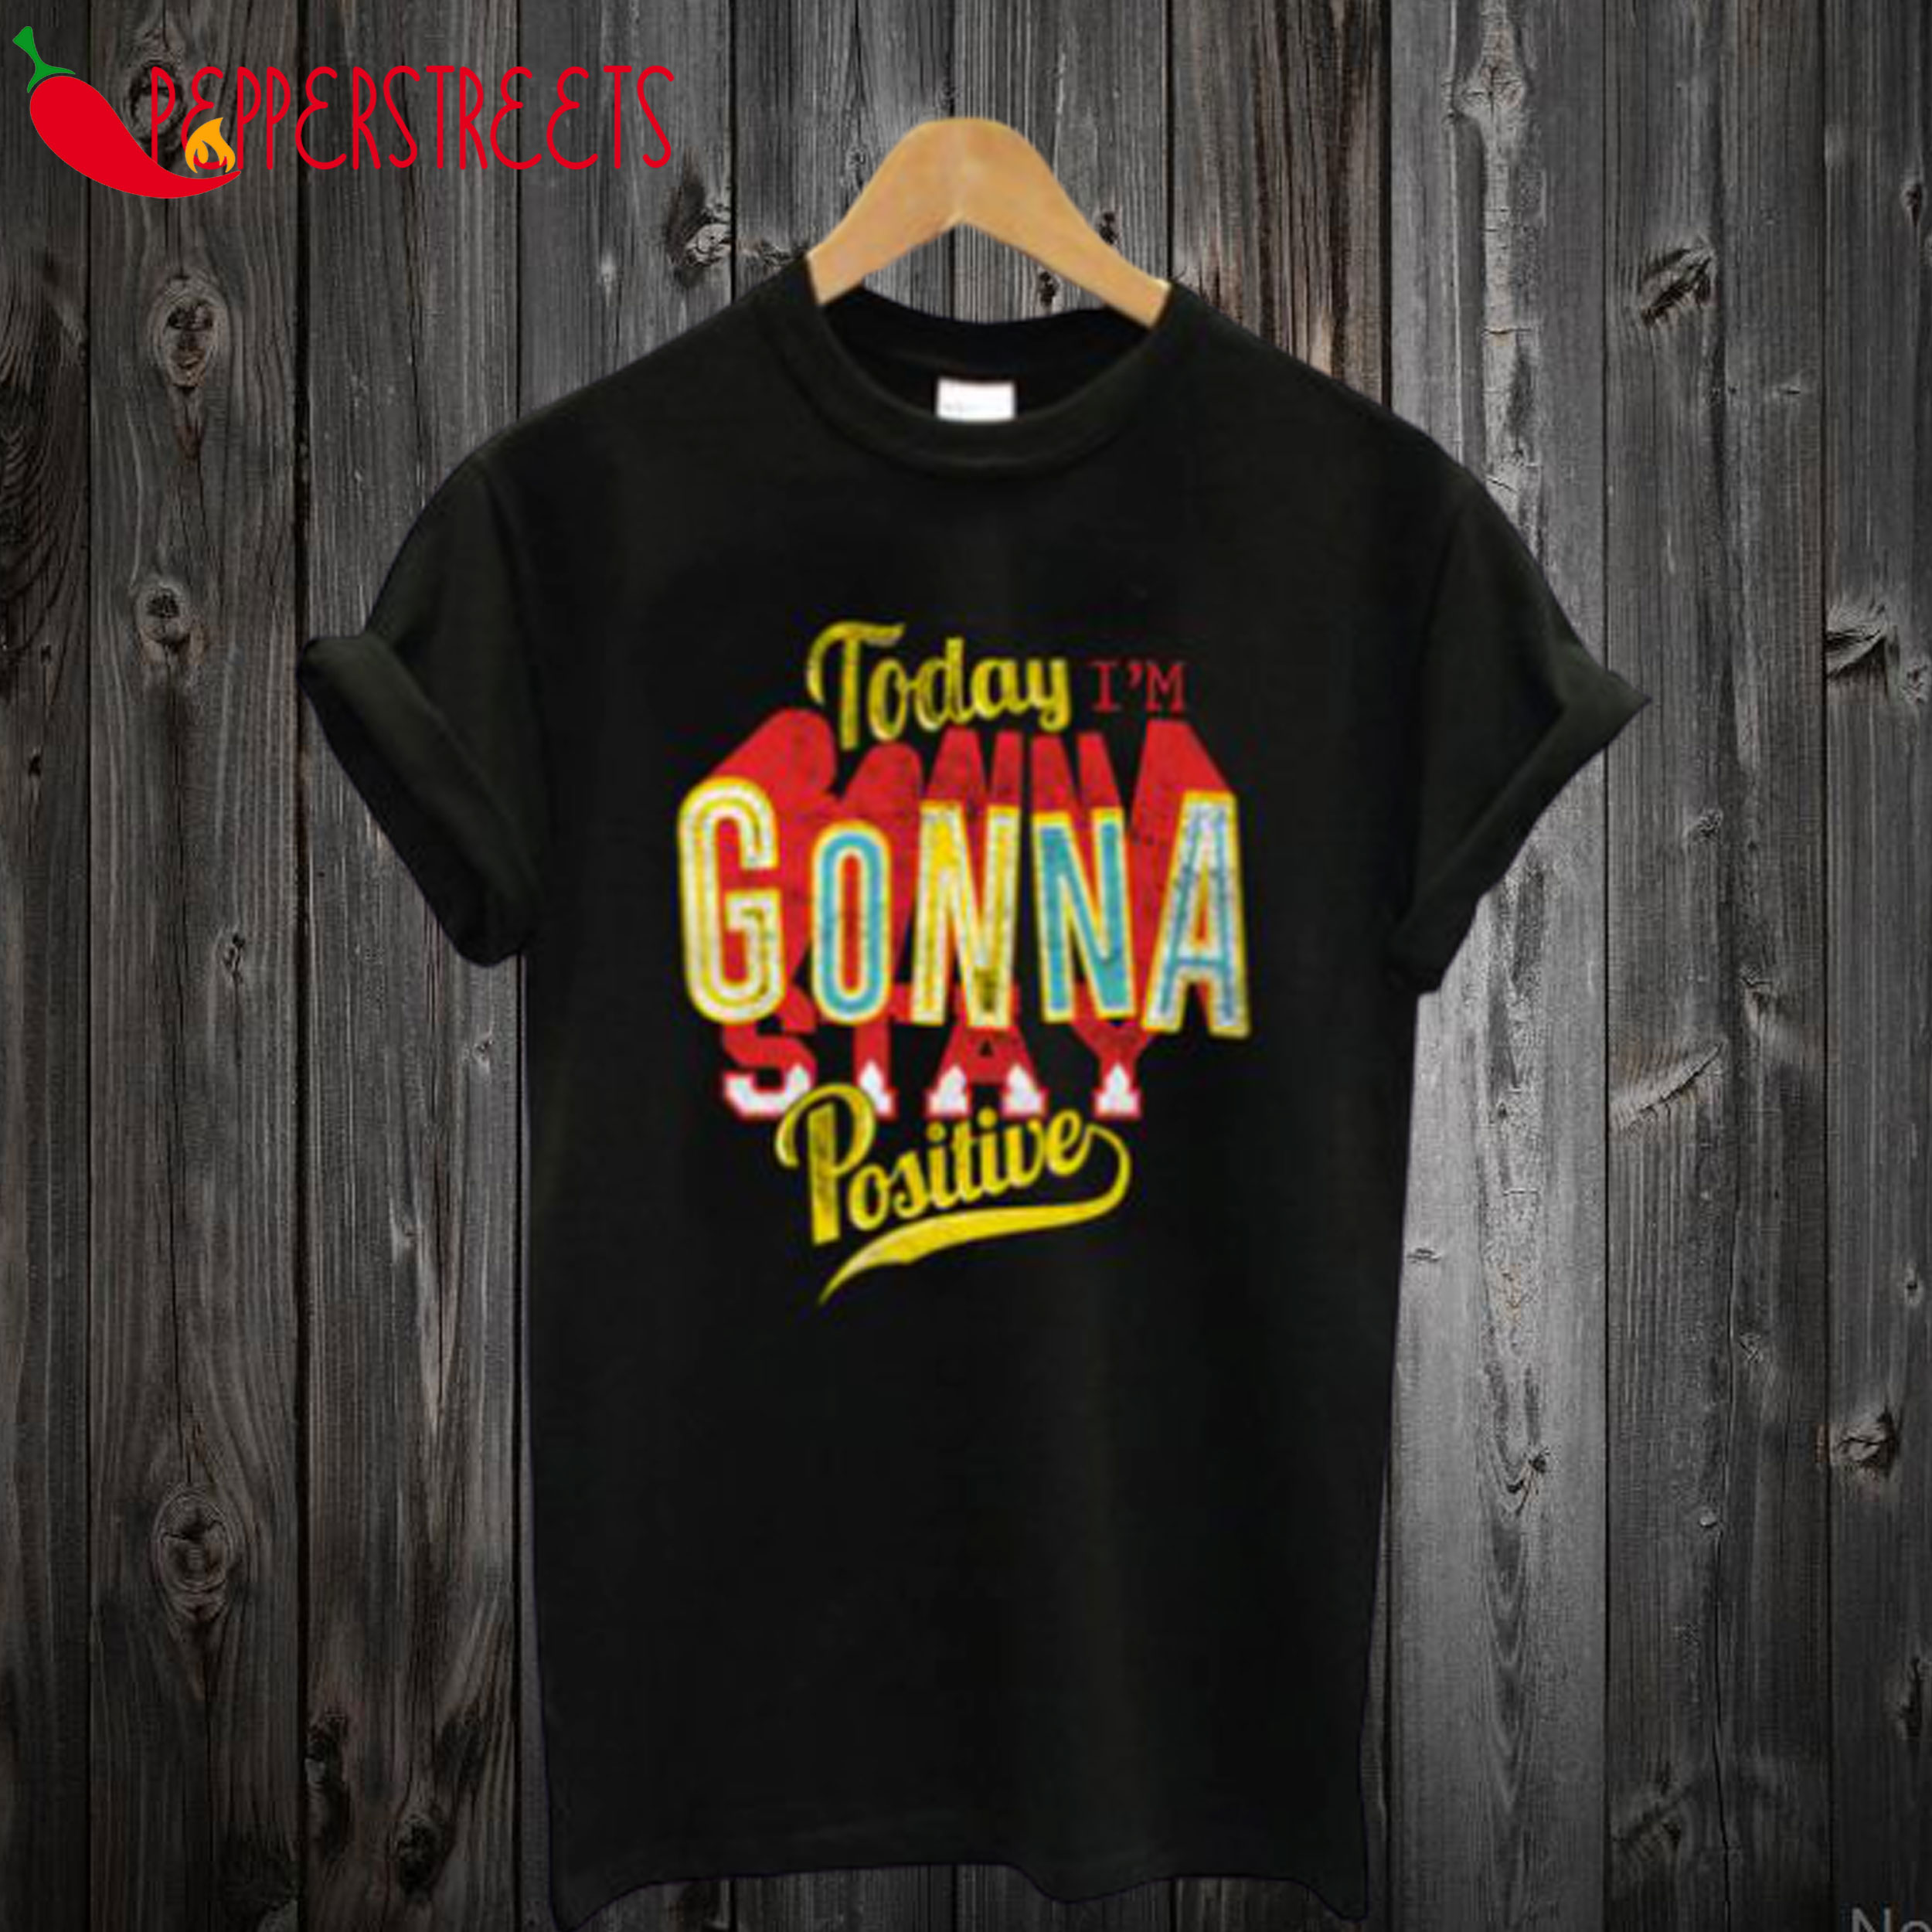 Today i’m gonna stay positive T-Shirt